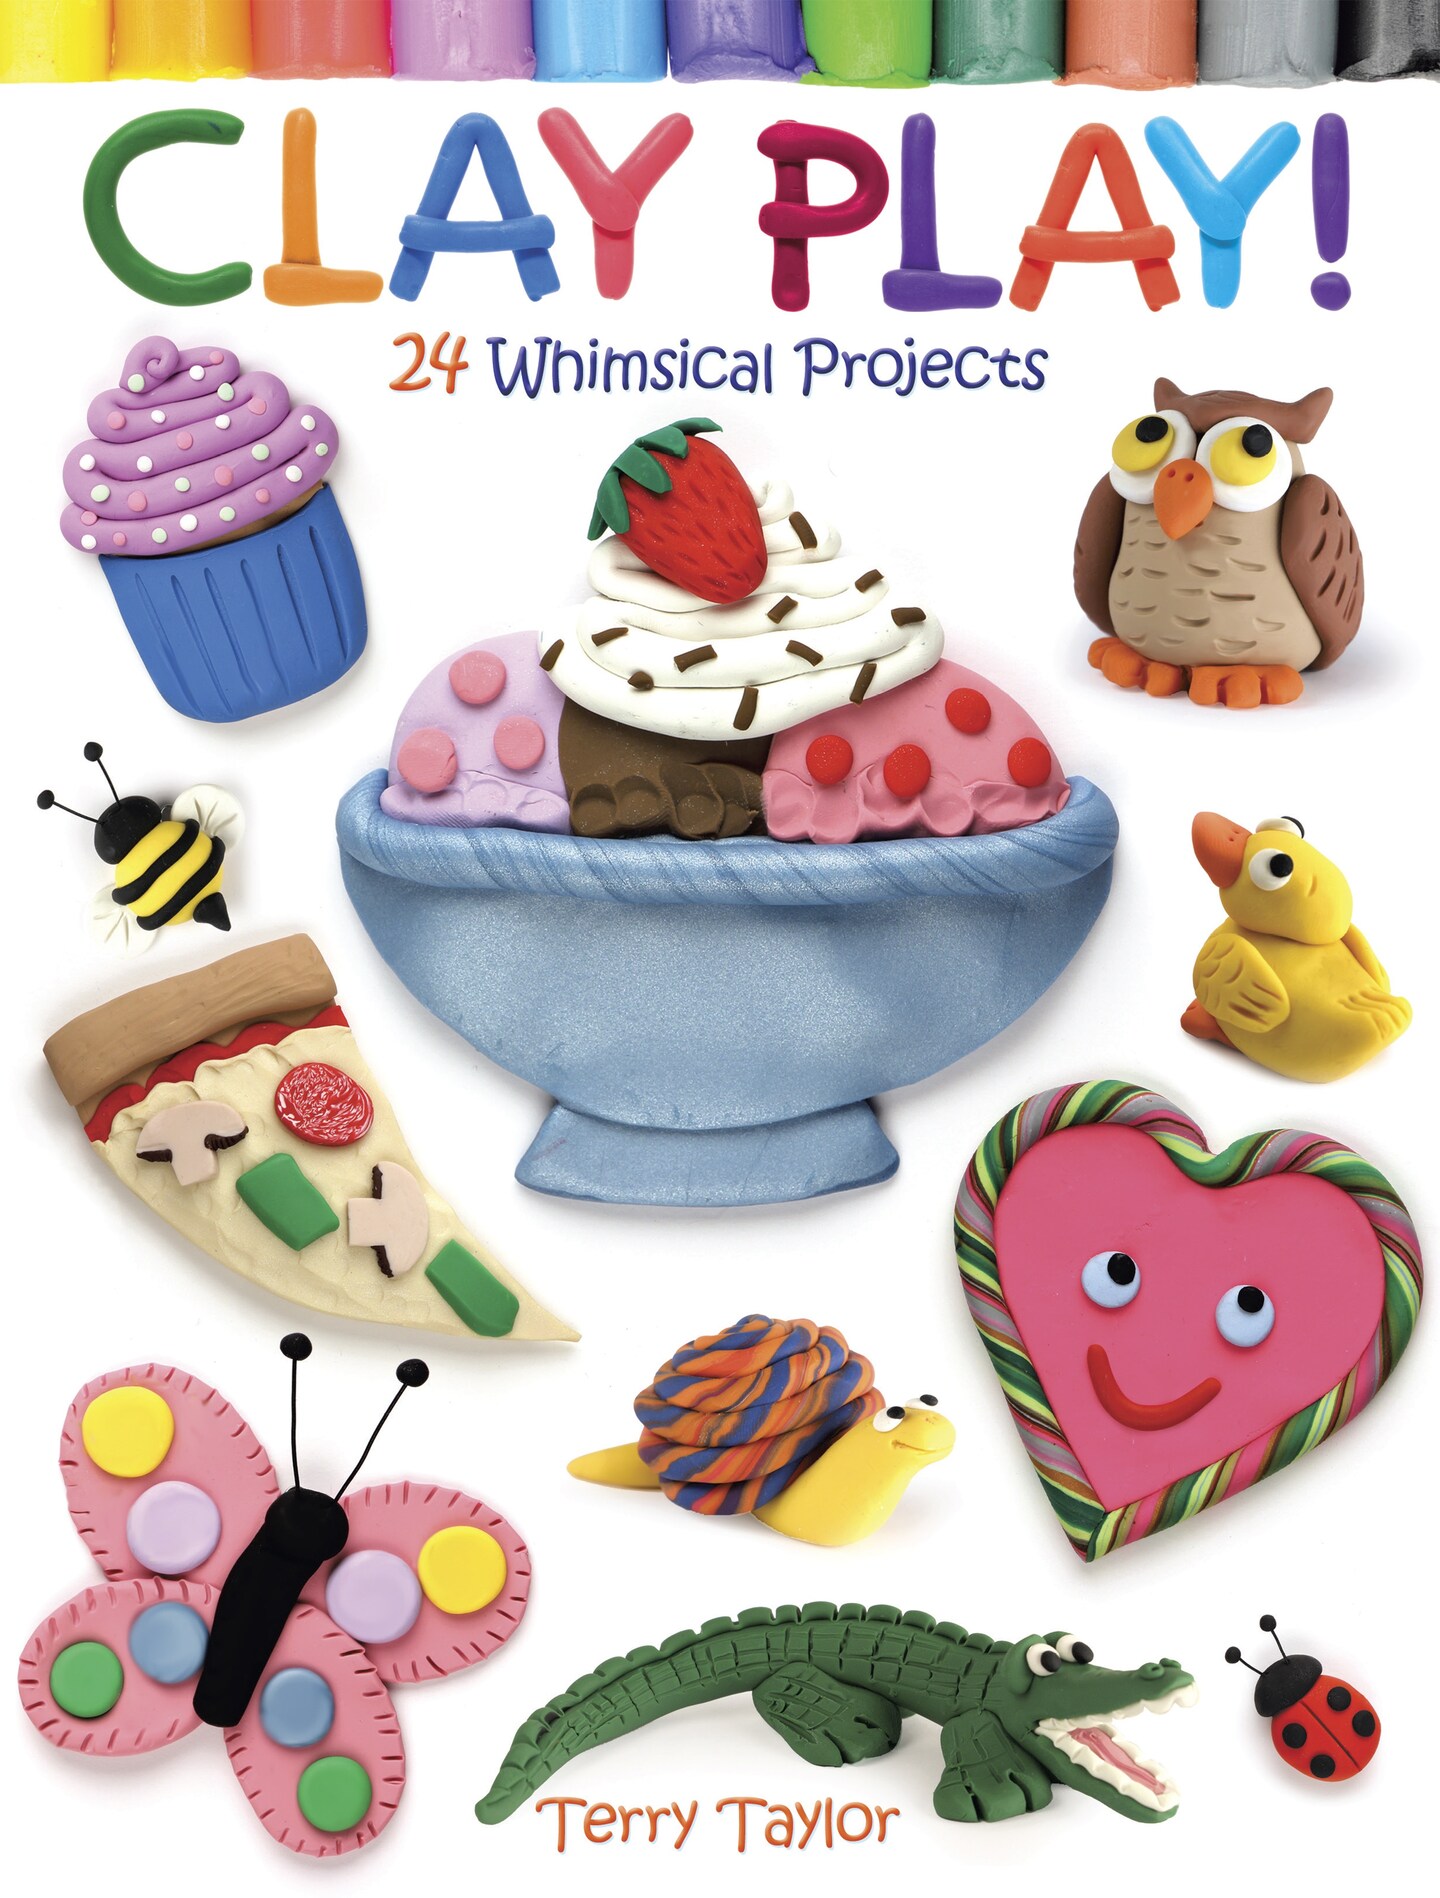 Clay Play! 24 Whimsical Projects-Softcover